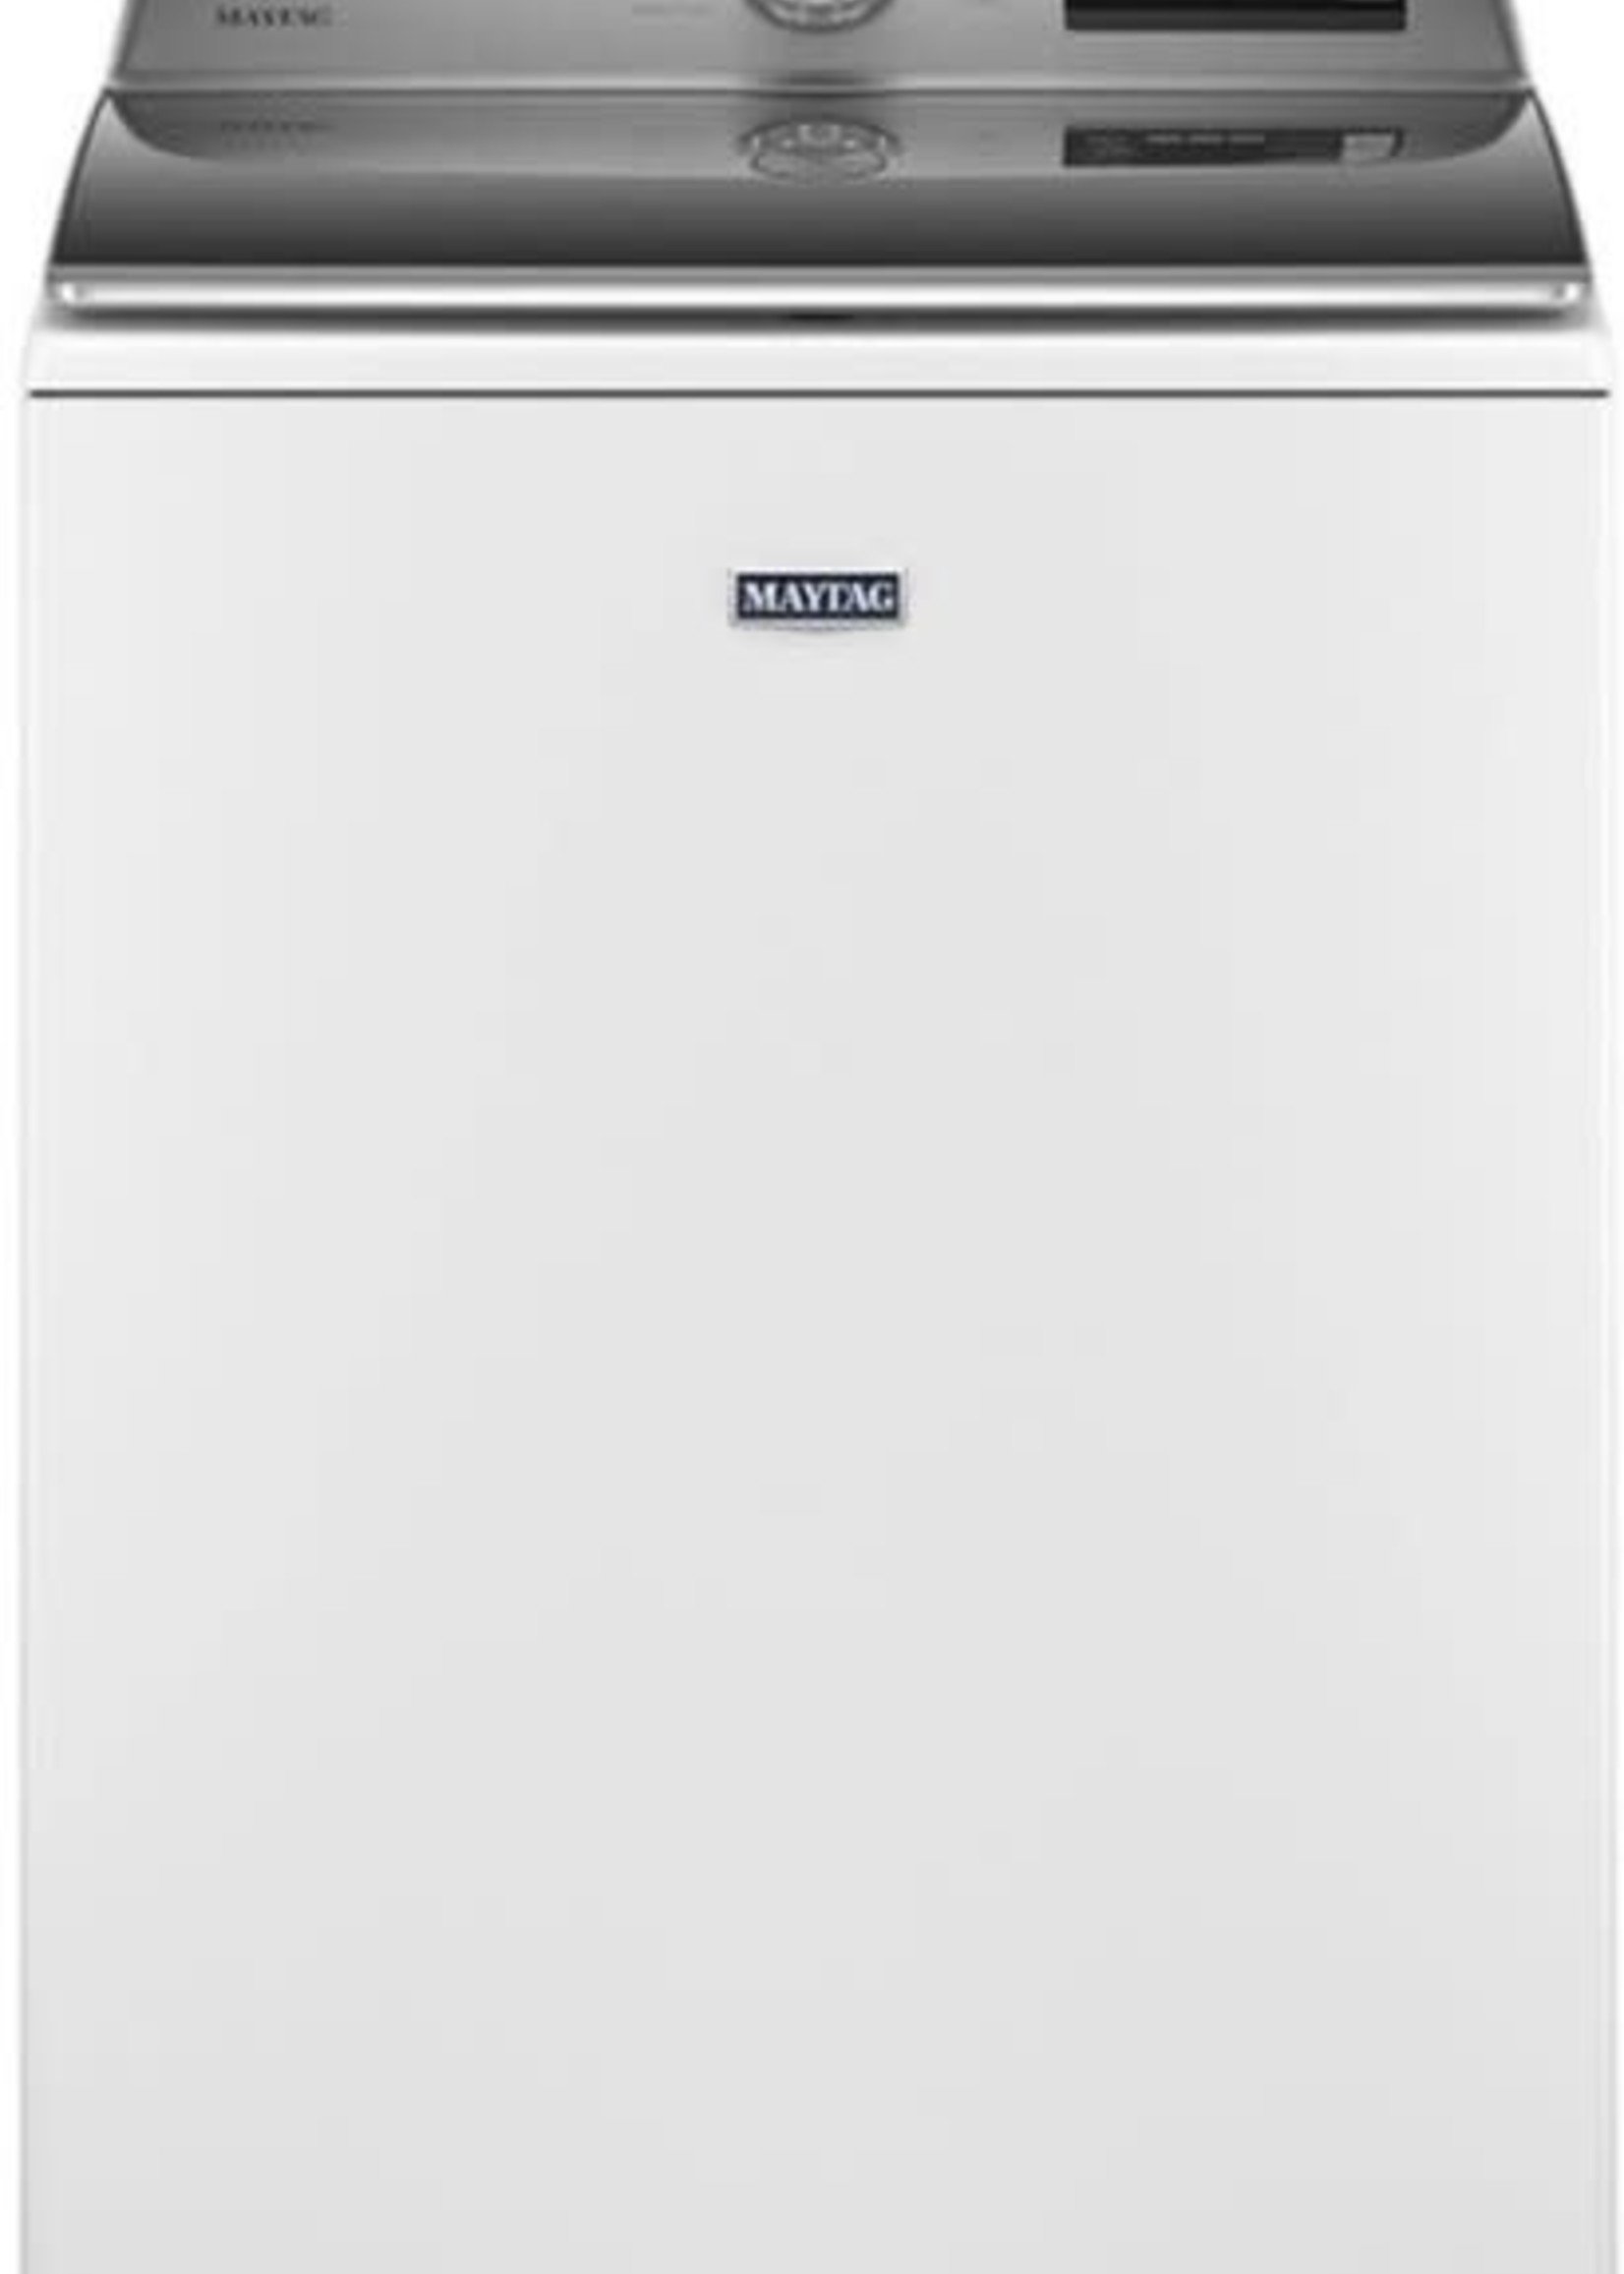 Maytag *Maytag   MVW6230HW   Smart capable 4.7-cu ft High Efficiency Top-Load Washer (White)